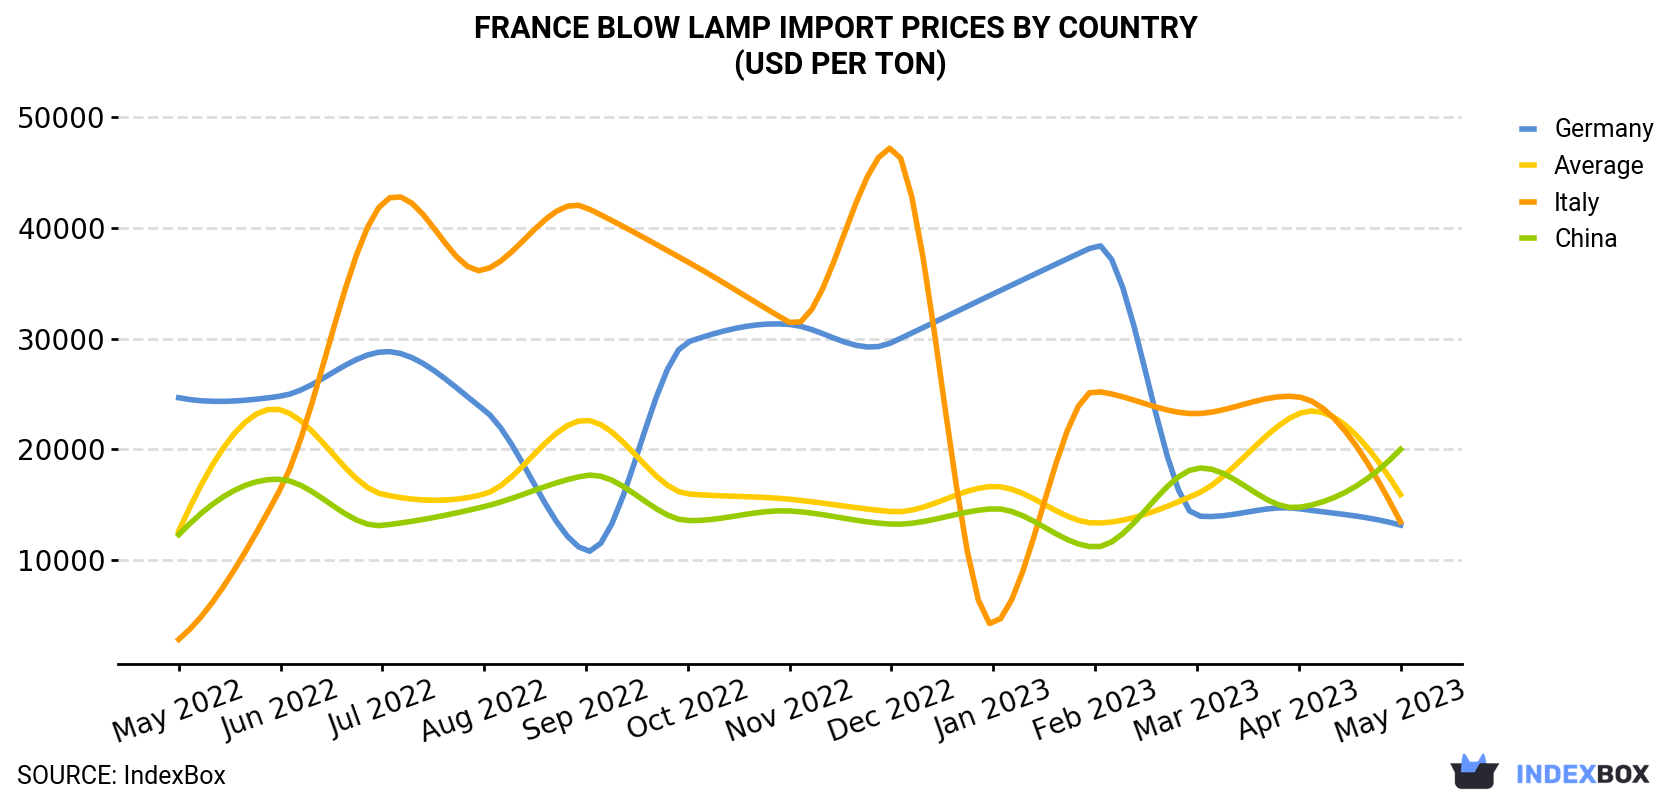 France Blow Lamp Import Prices By Country (USD Per Ton)